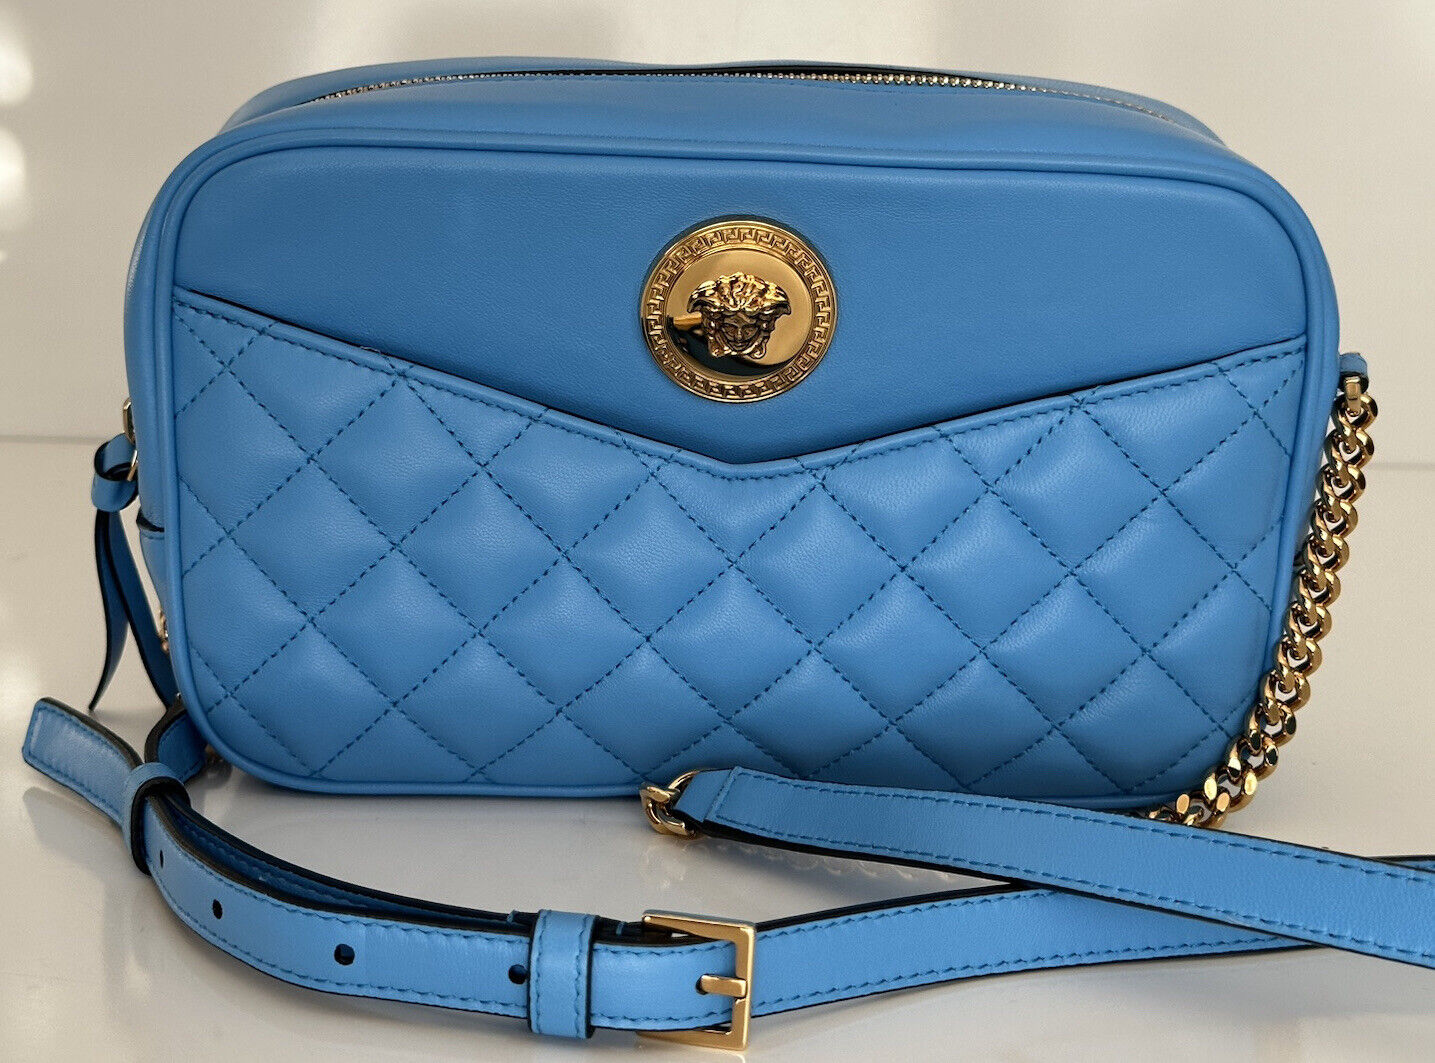 NWT $1275 Versace Quilted Lamb Leather Blue Medium Shoulder Bag 1008828 Italy